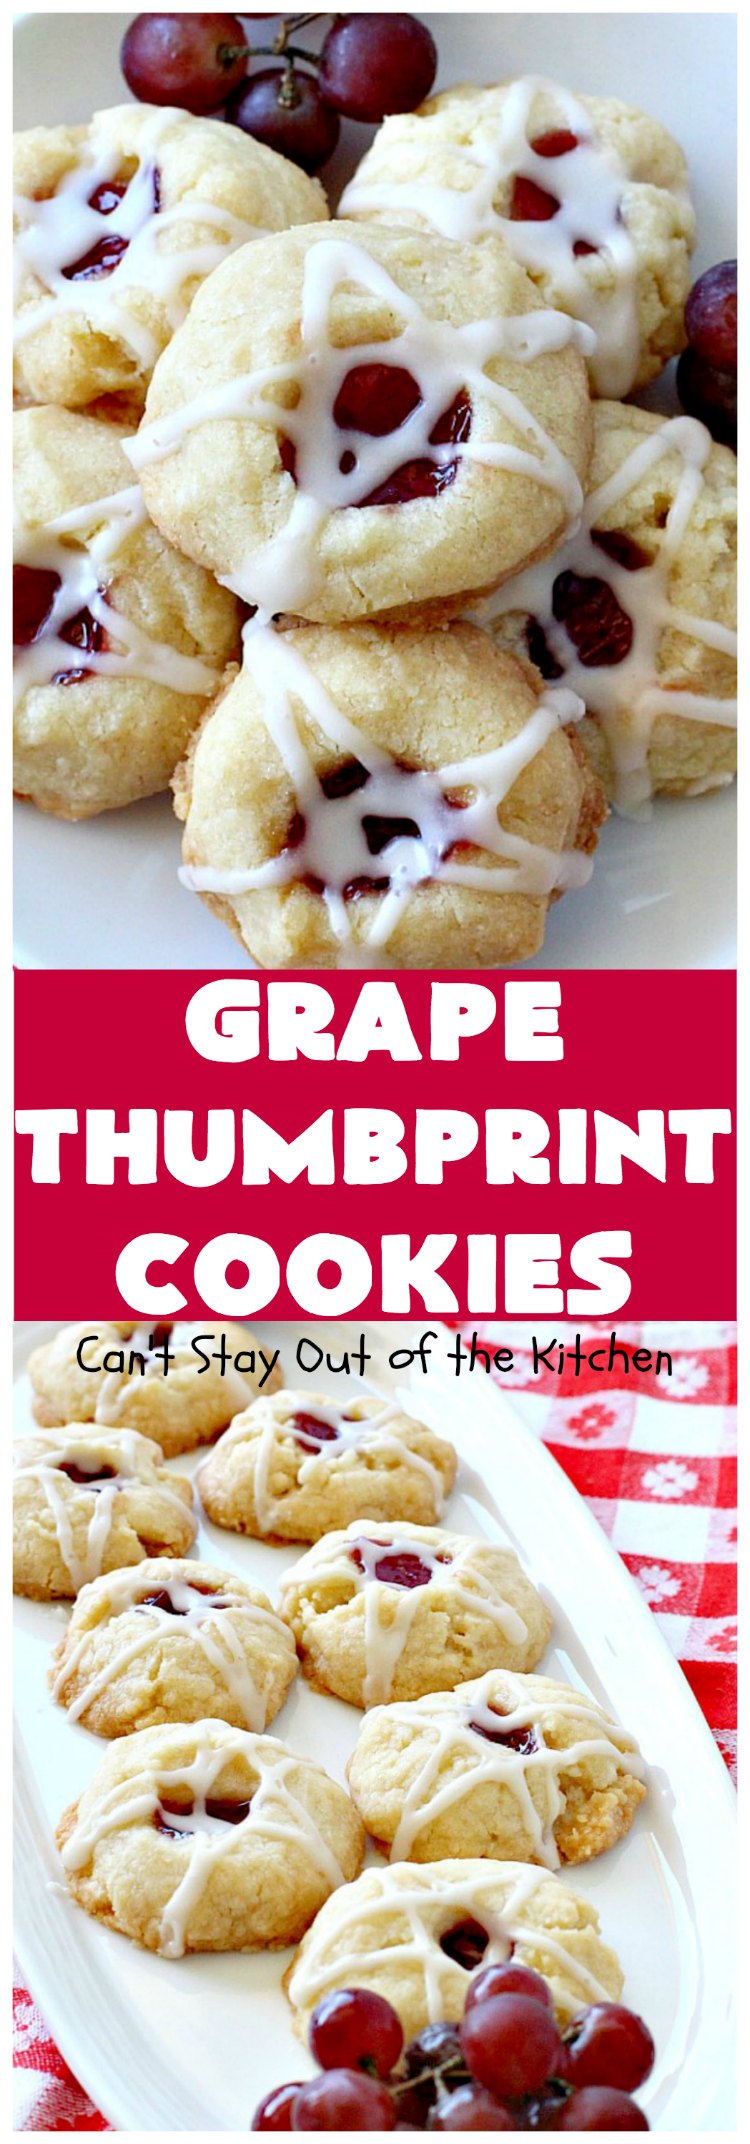 Grape Thumbprint Cookies | Can't Stay Out of the Kitchen